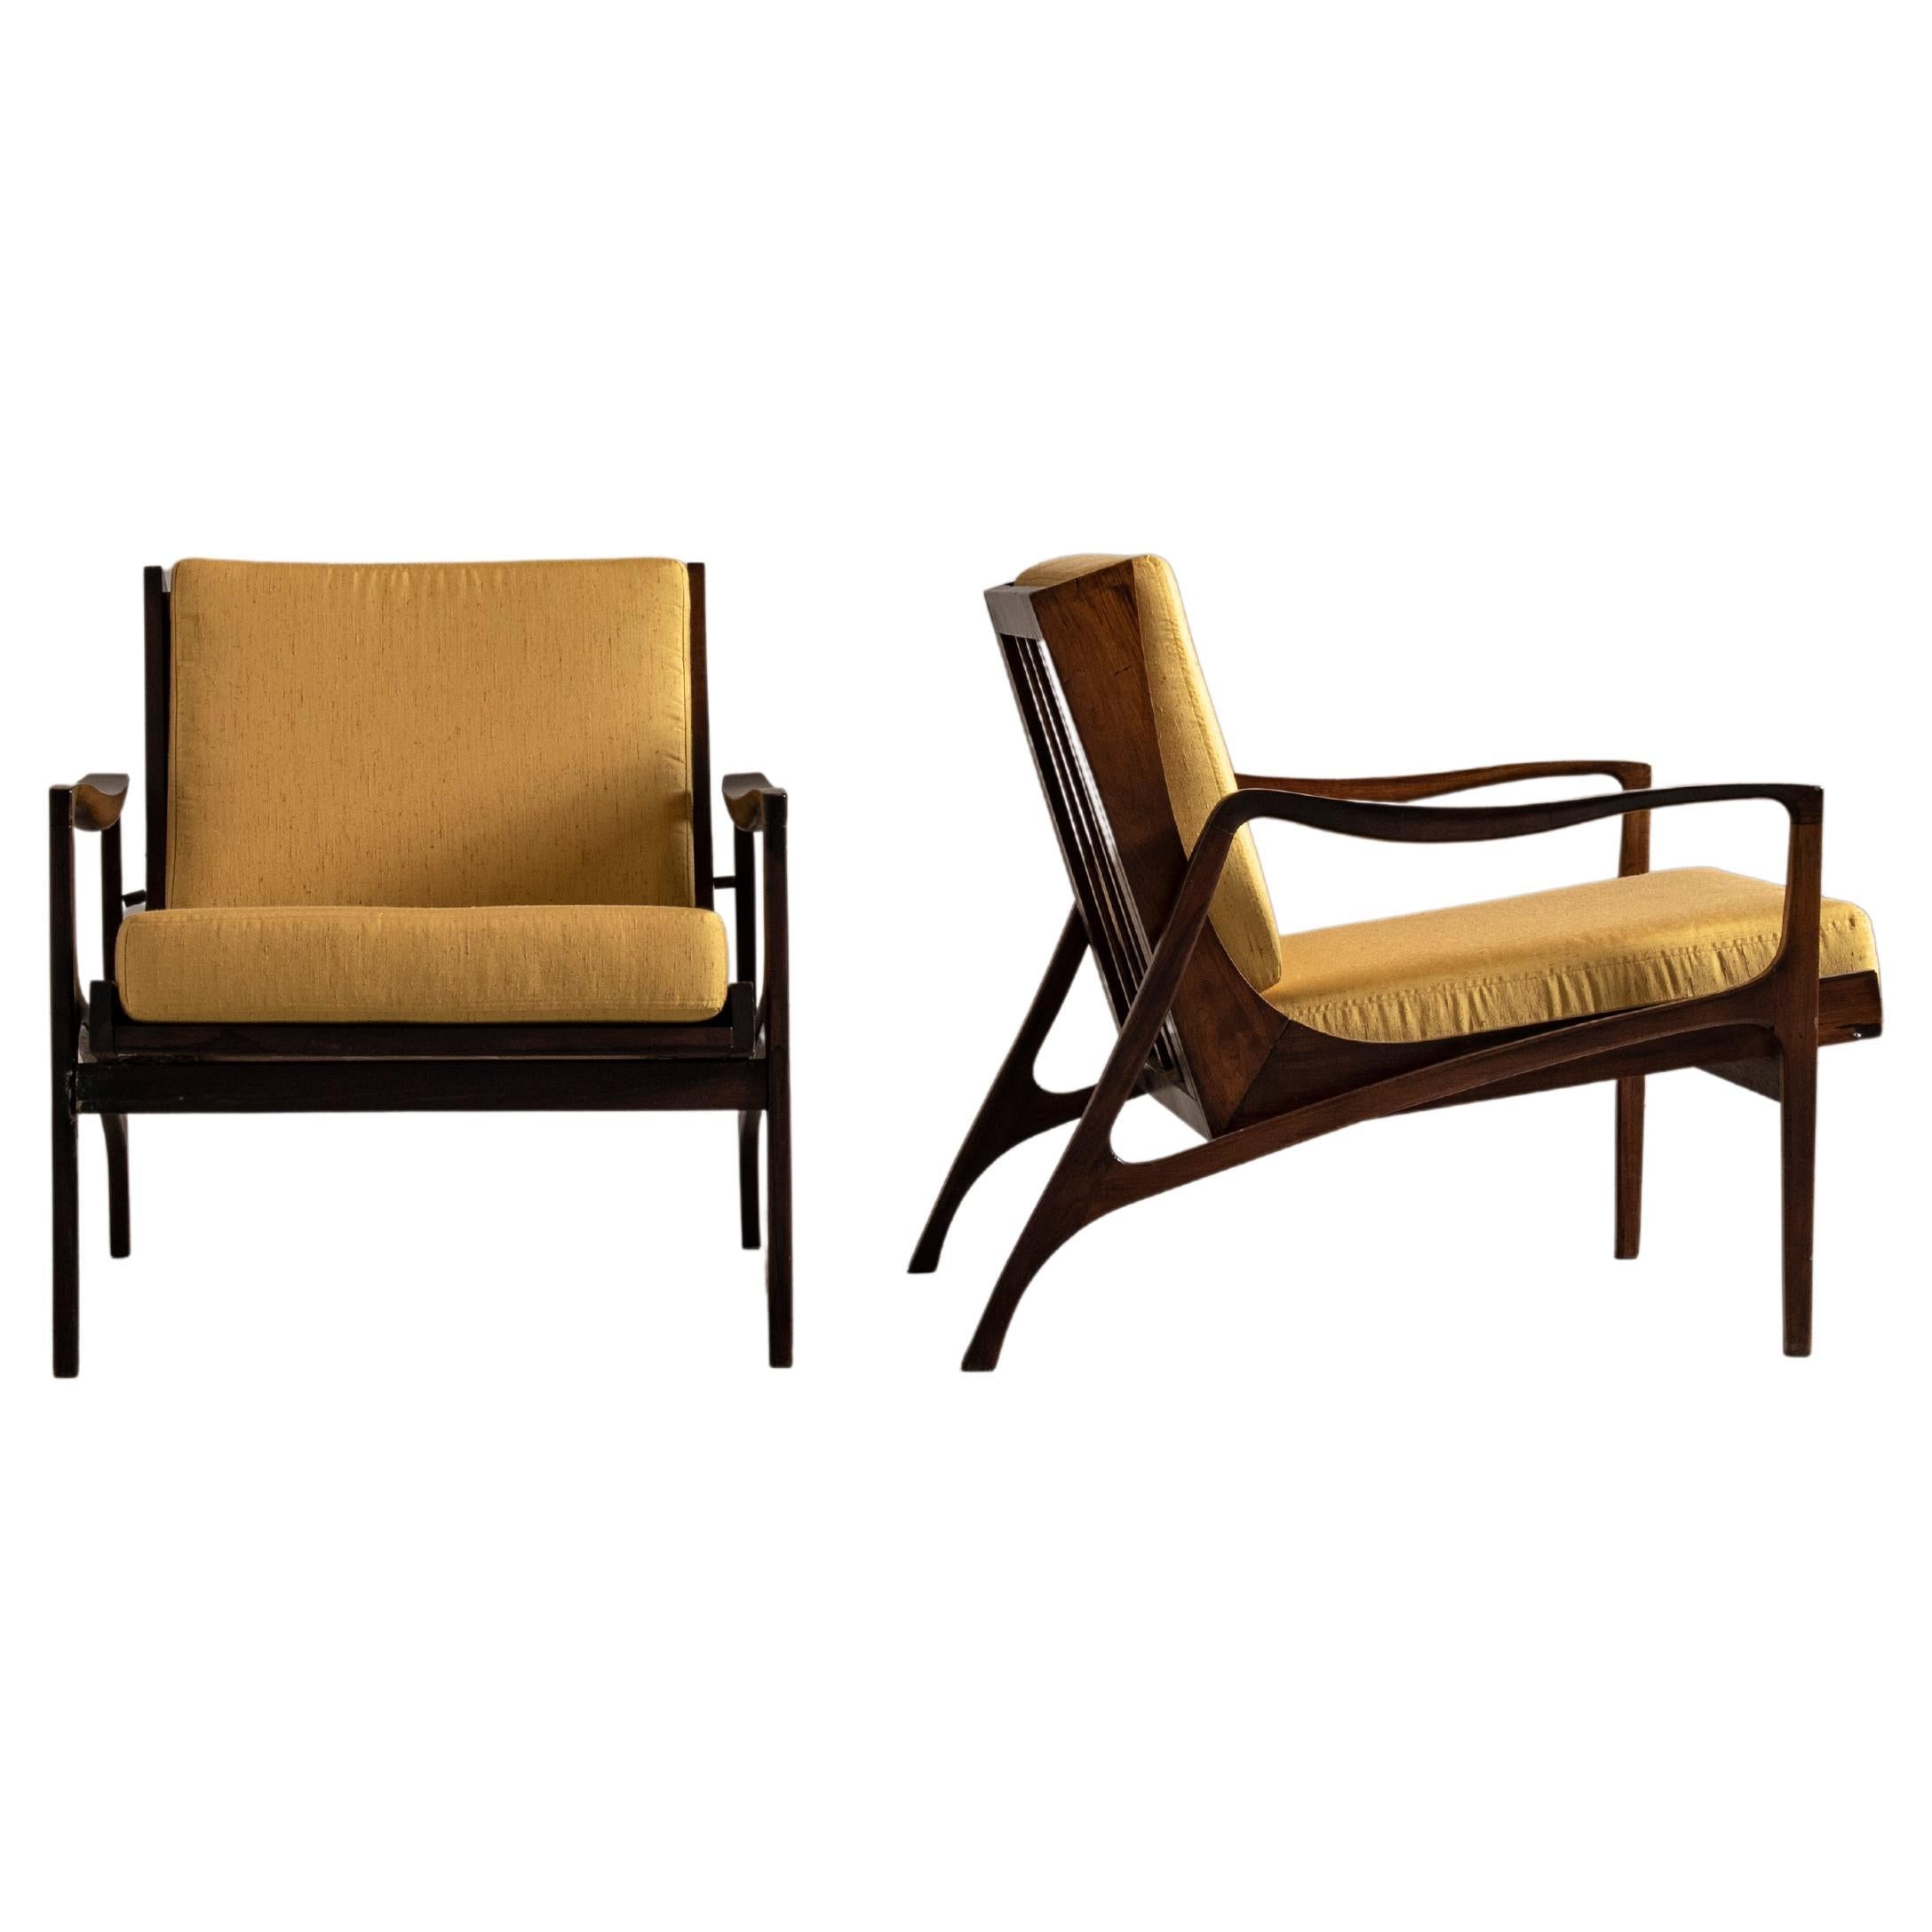 Pair of Lounge Chairs in Solid Brazilian Hardwood, Mid-Century Modern Design For Sale